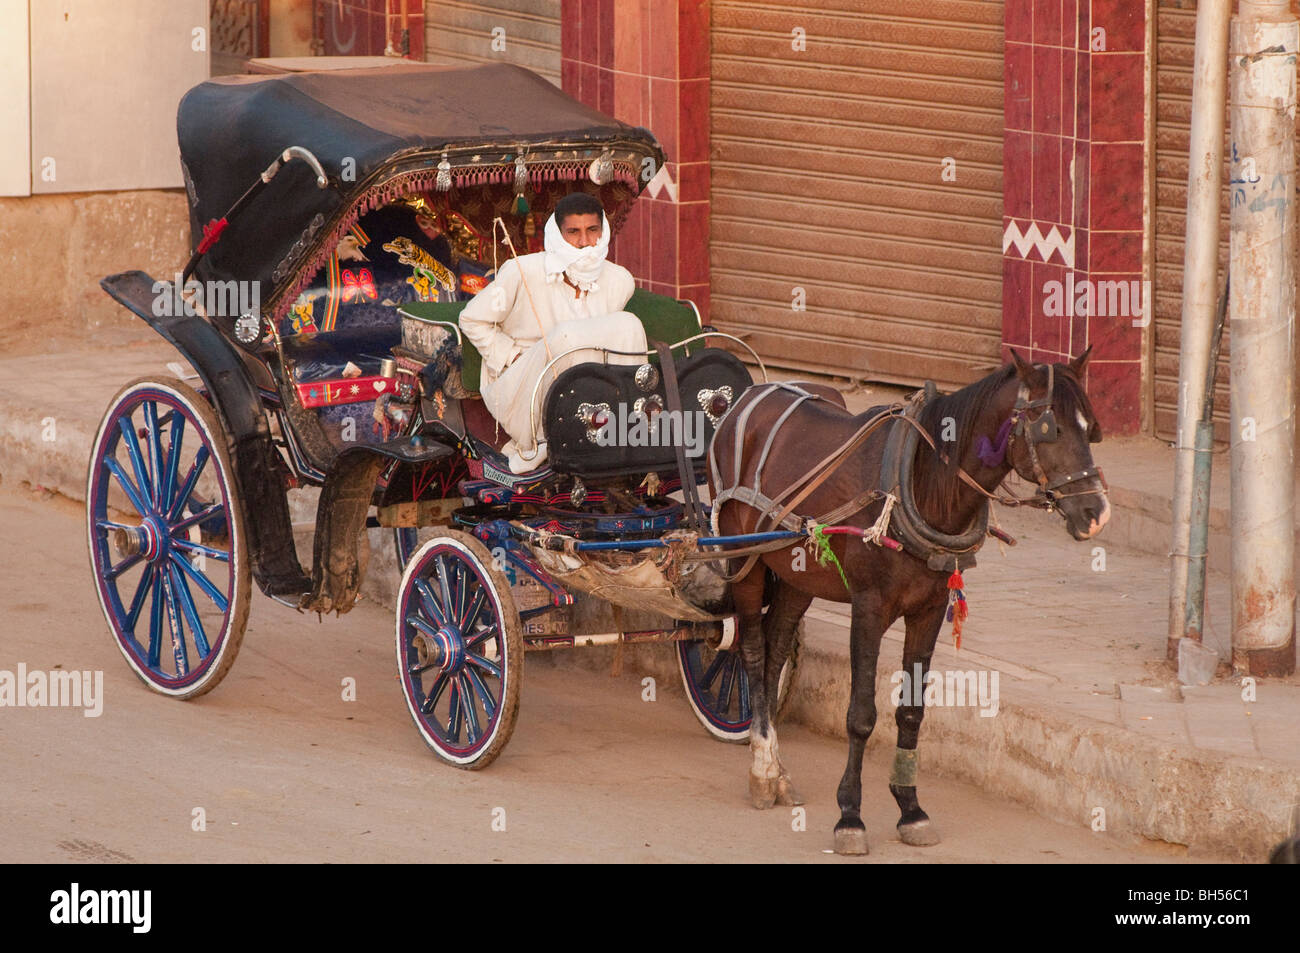 Horse and carriage traffic in Edfu, Egypt, Africa Stock Photo